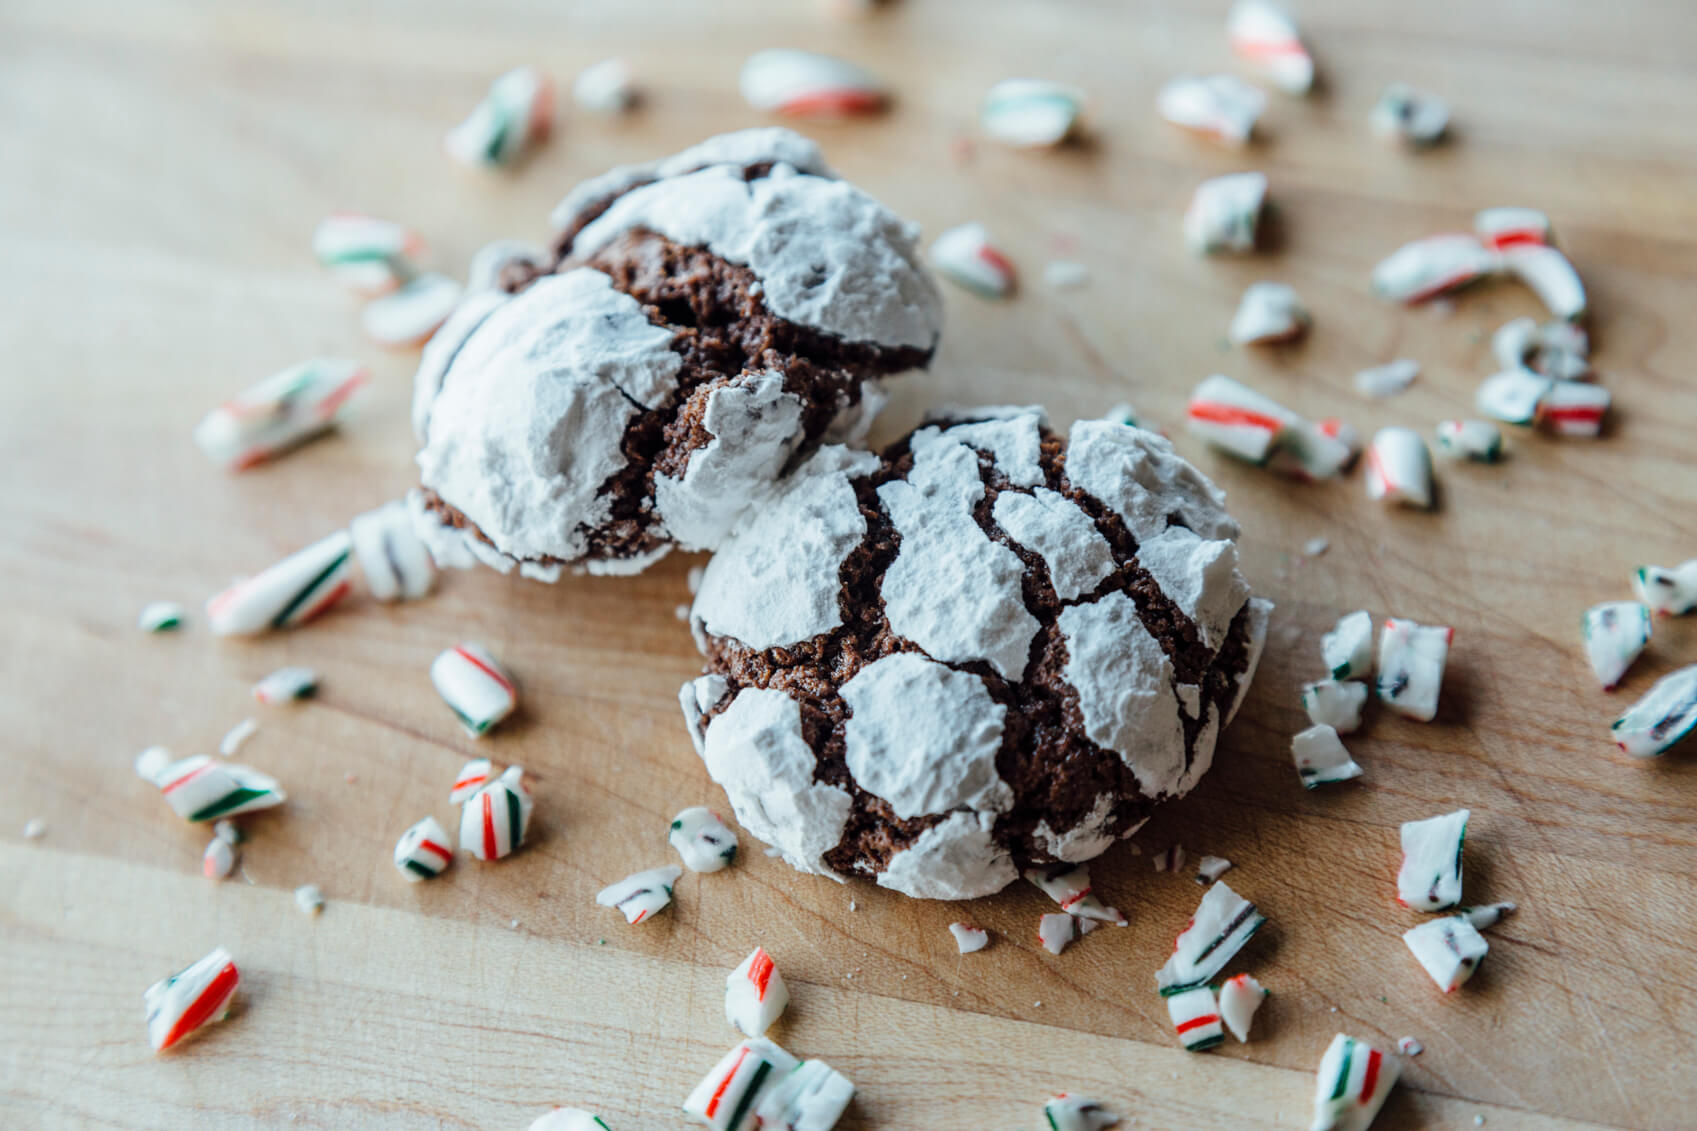 Baking the cookies with powdered sugar gives them their "crinkle" look